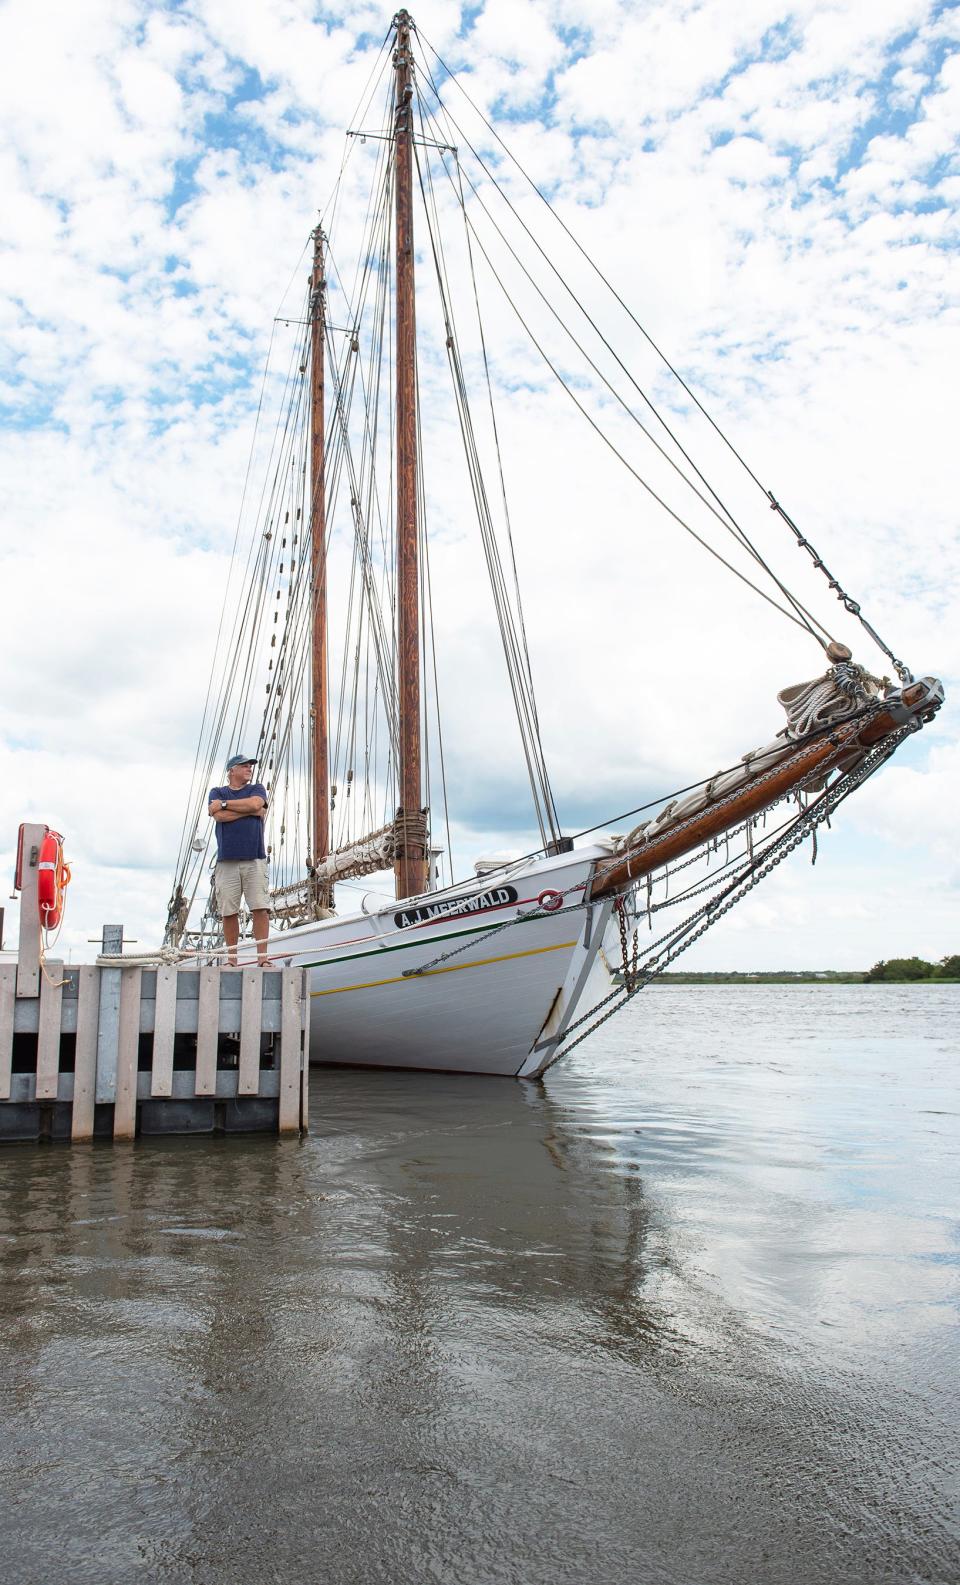 AJ Meerwald engineer Ken Haney stands next to the AJ Meerwald as the 1928-vintage oyster schooner, that recently received a major overhaul, is docked at the Bayshore Center at Bivalve in Port Norris, NJ, on Tuesday, August 16, 2022.  